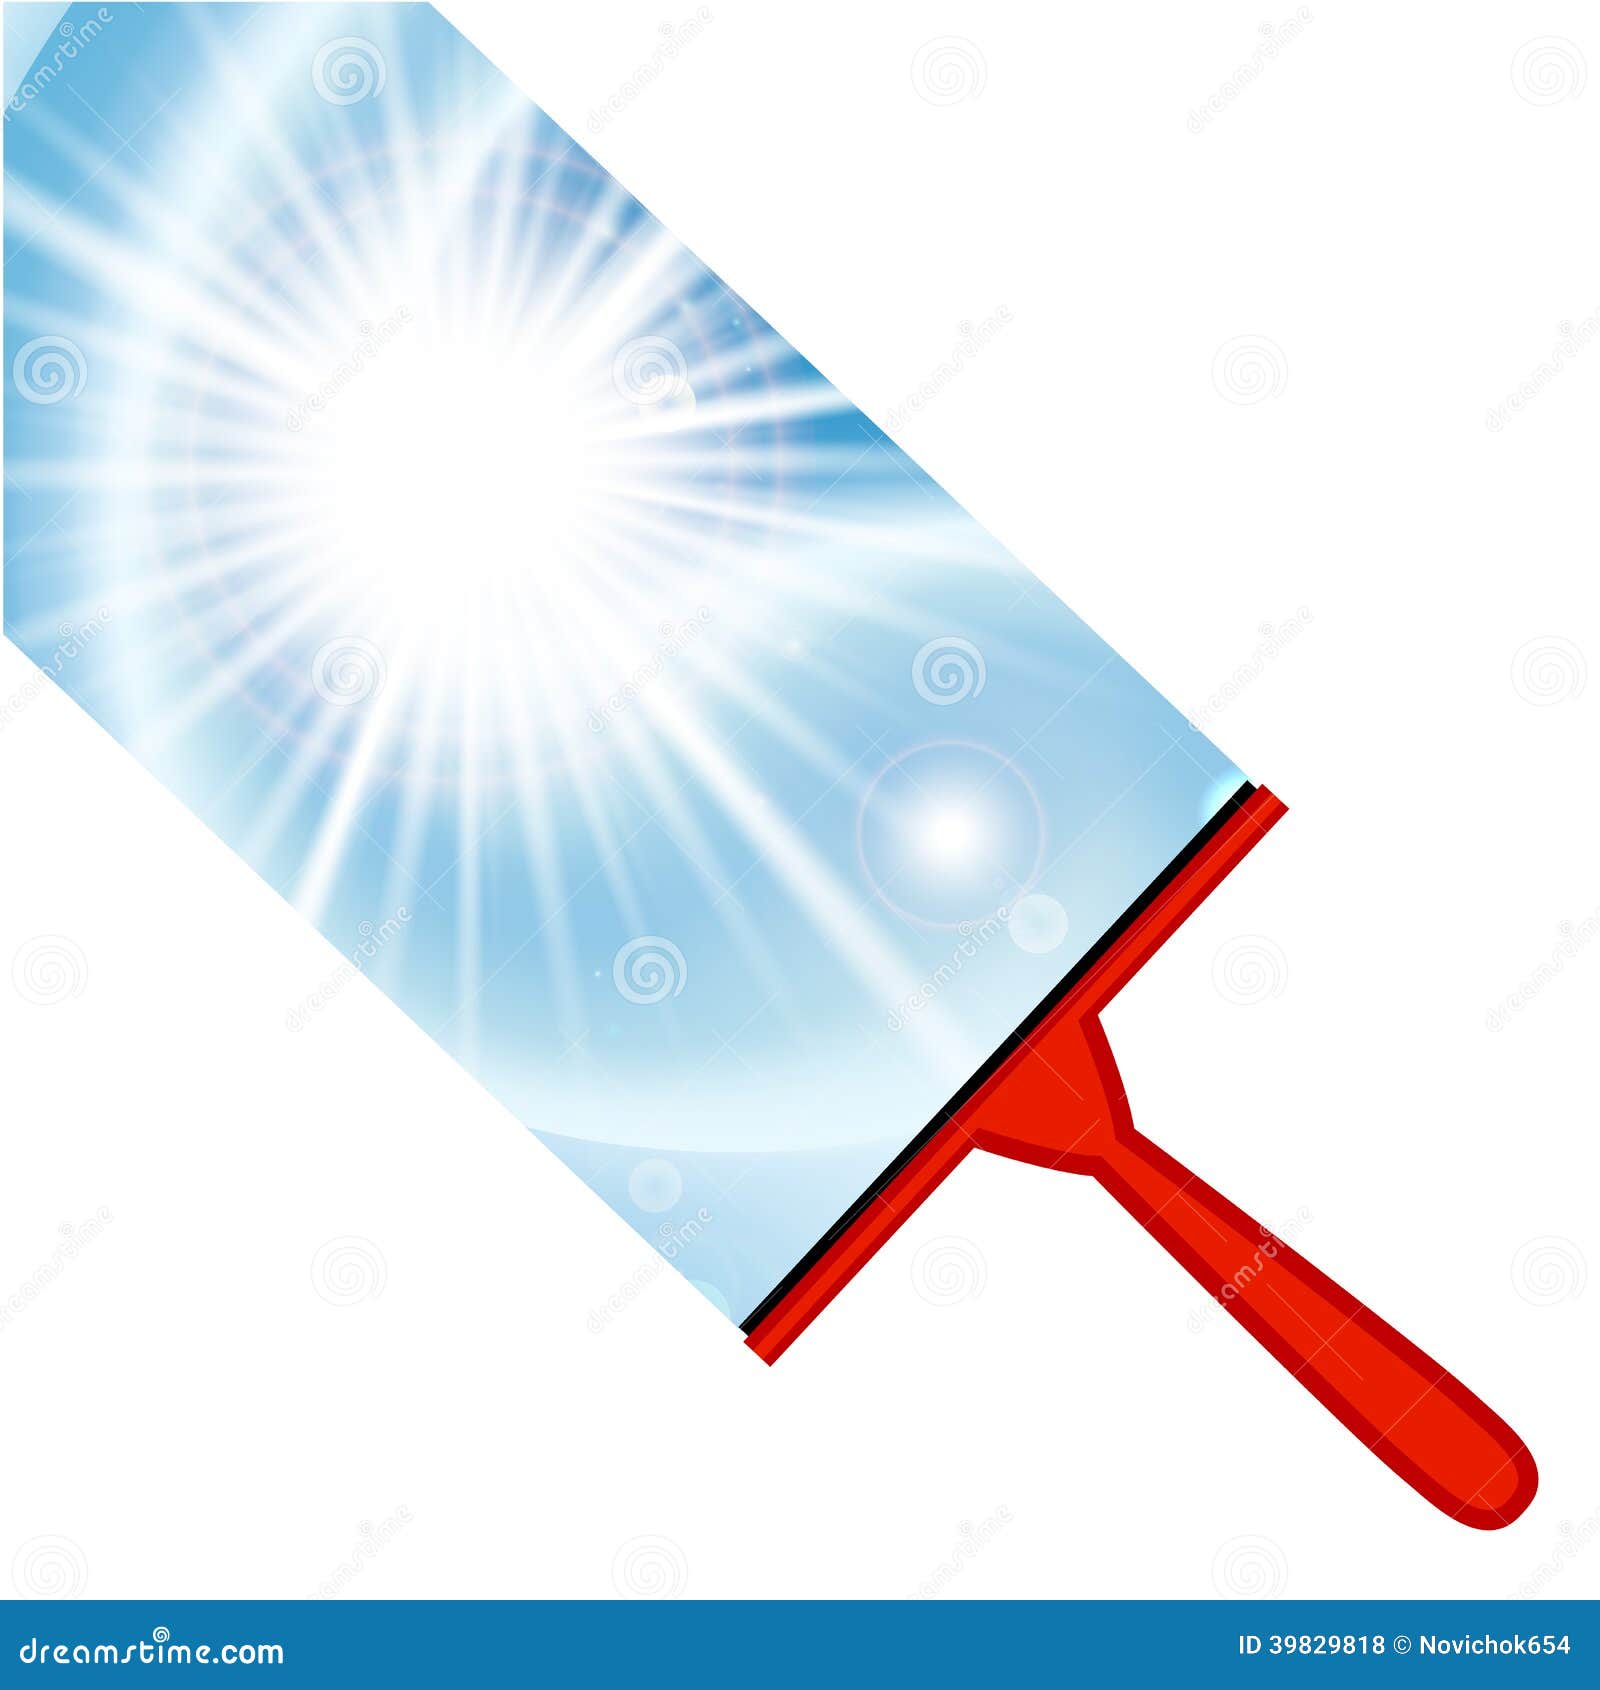 clip art for window cleaning - photo #38